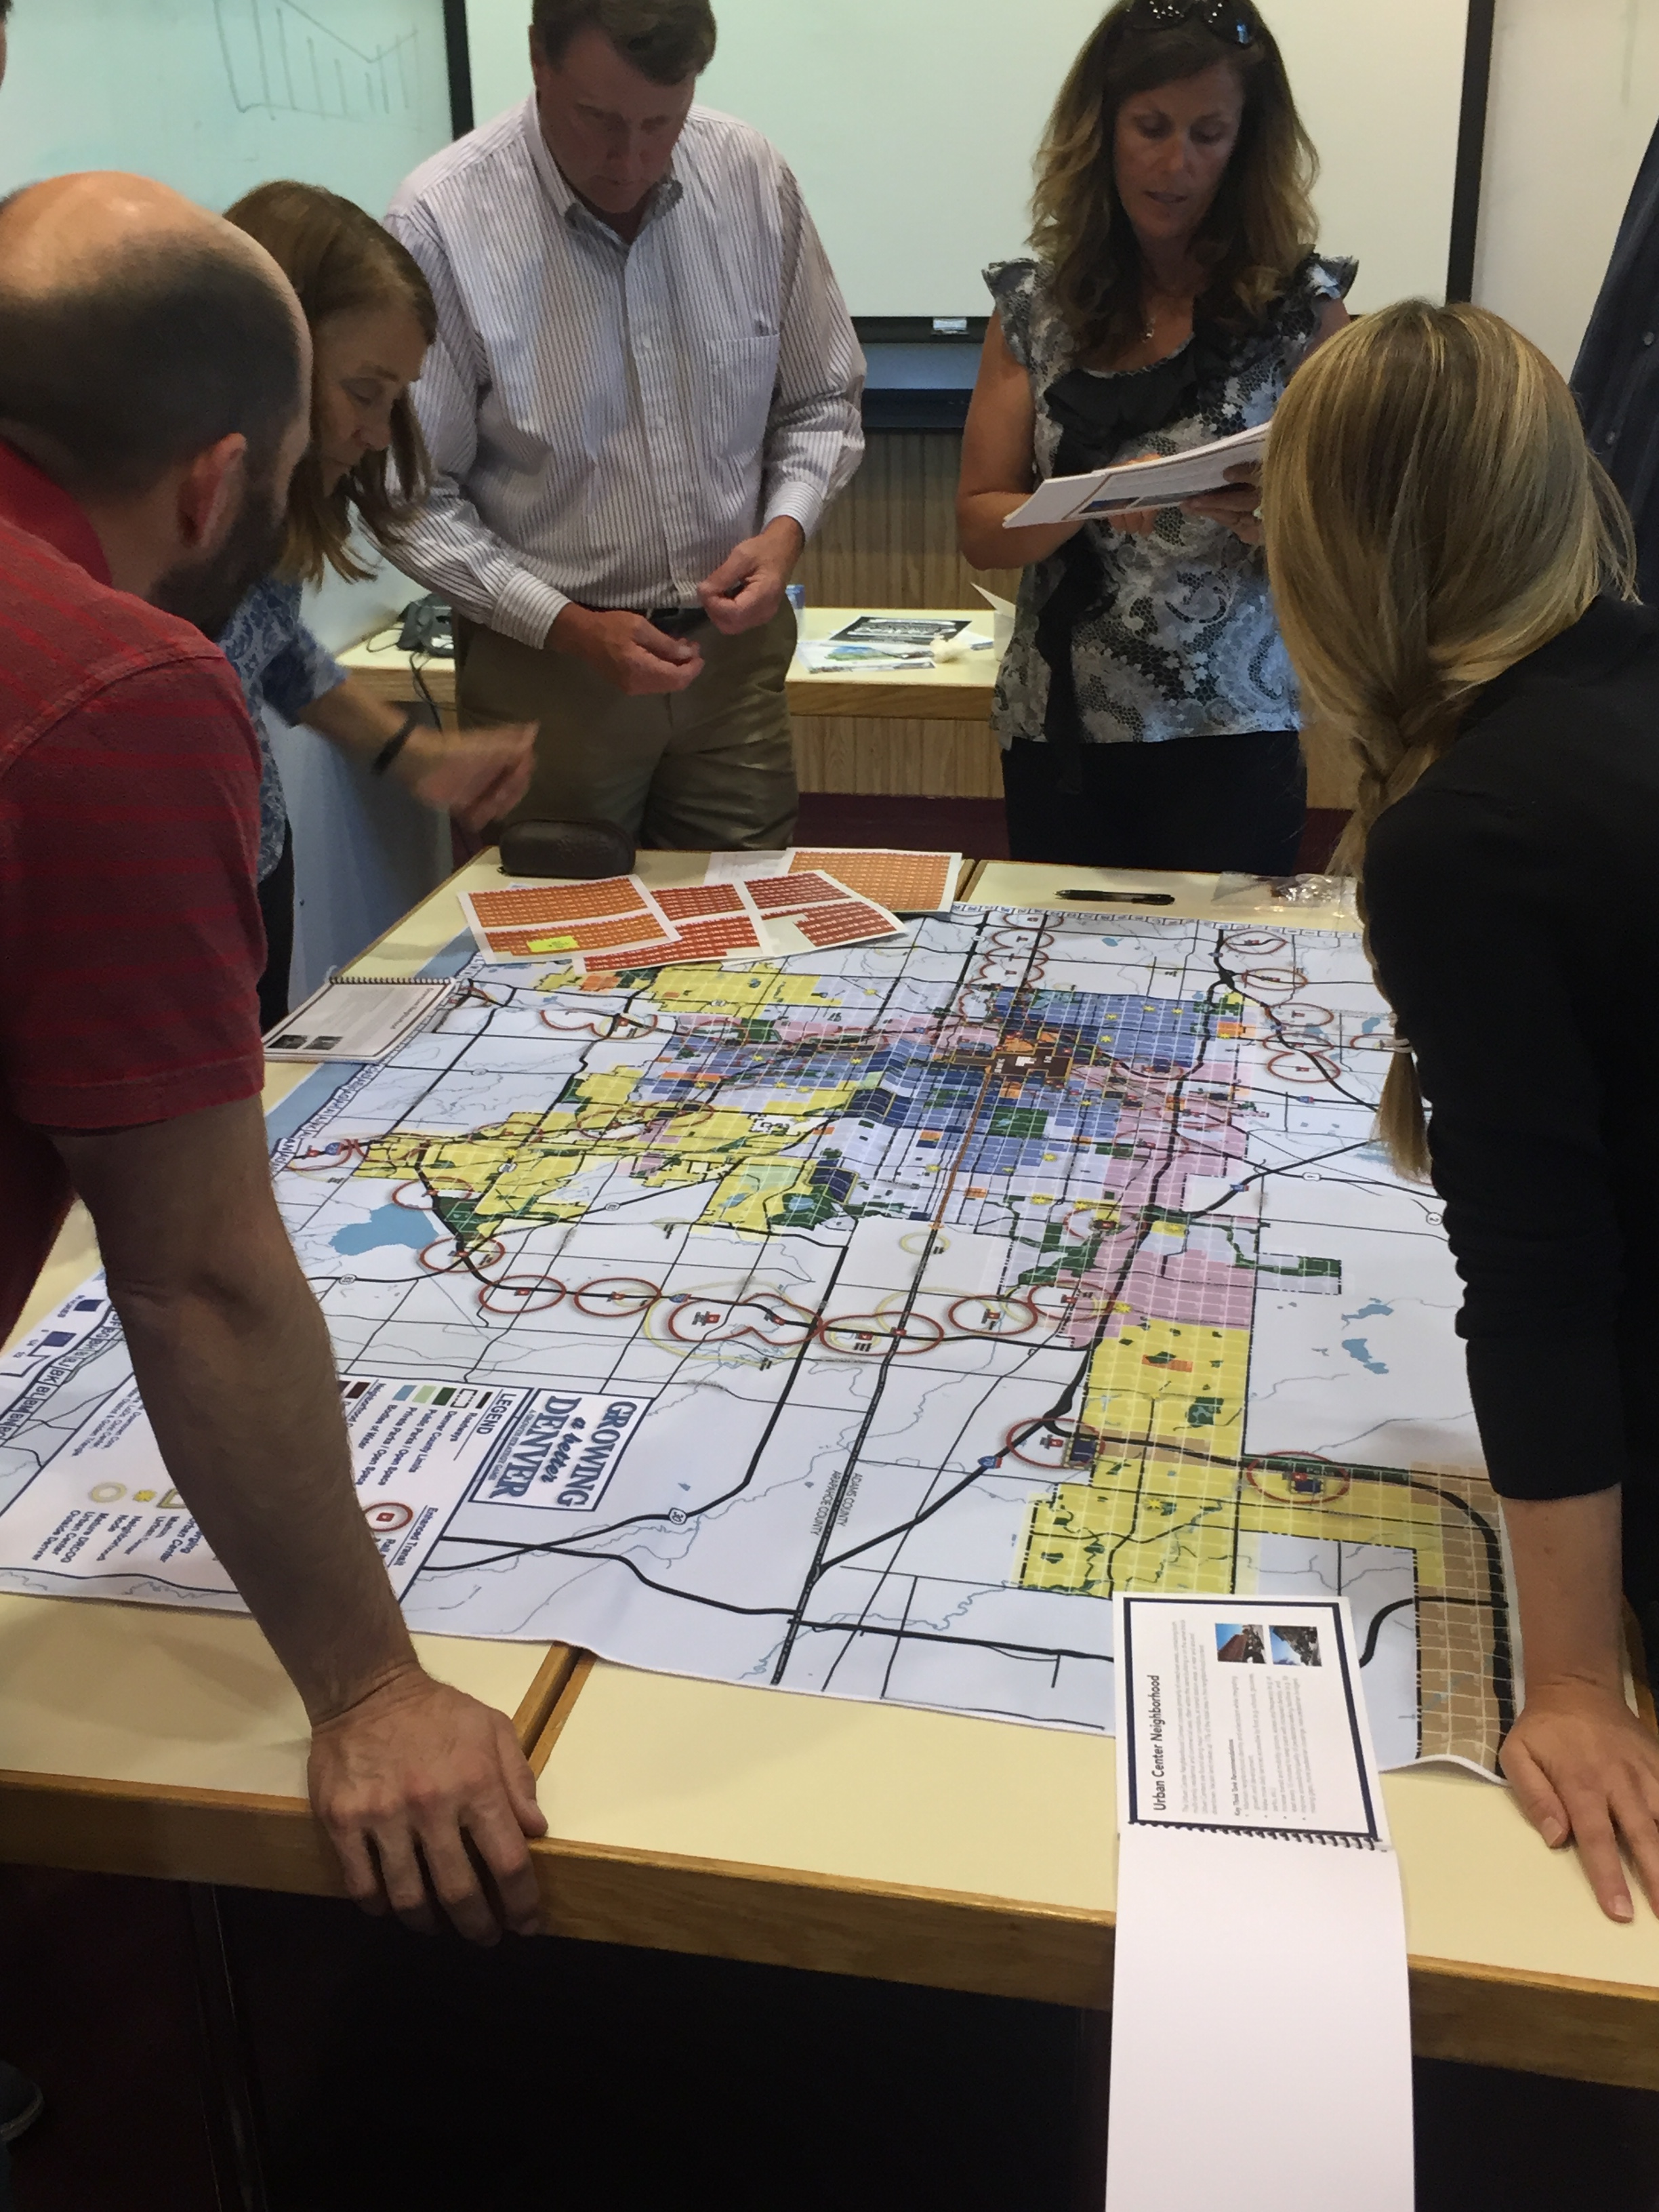 Denver Water planners play "Growing a better Denver game" developed by Denveright to help communicate, educate and make decisions on citywide land use and transportation planning.